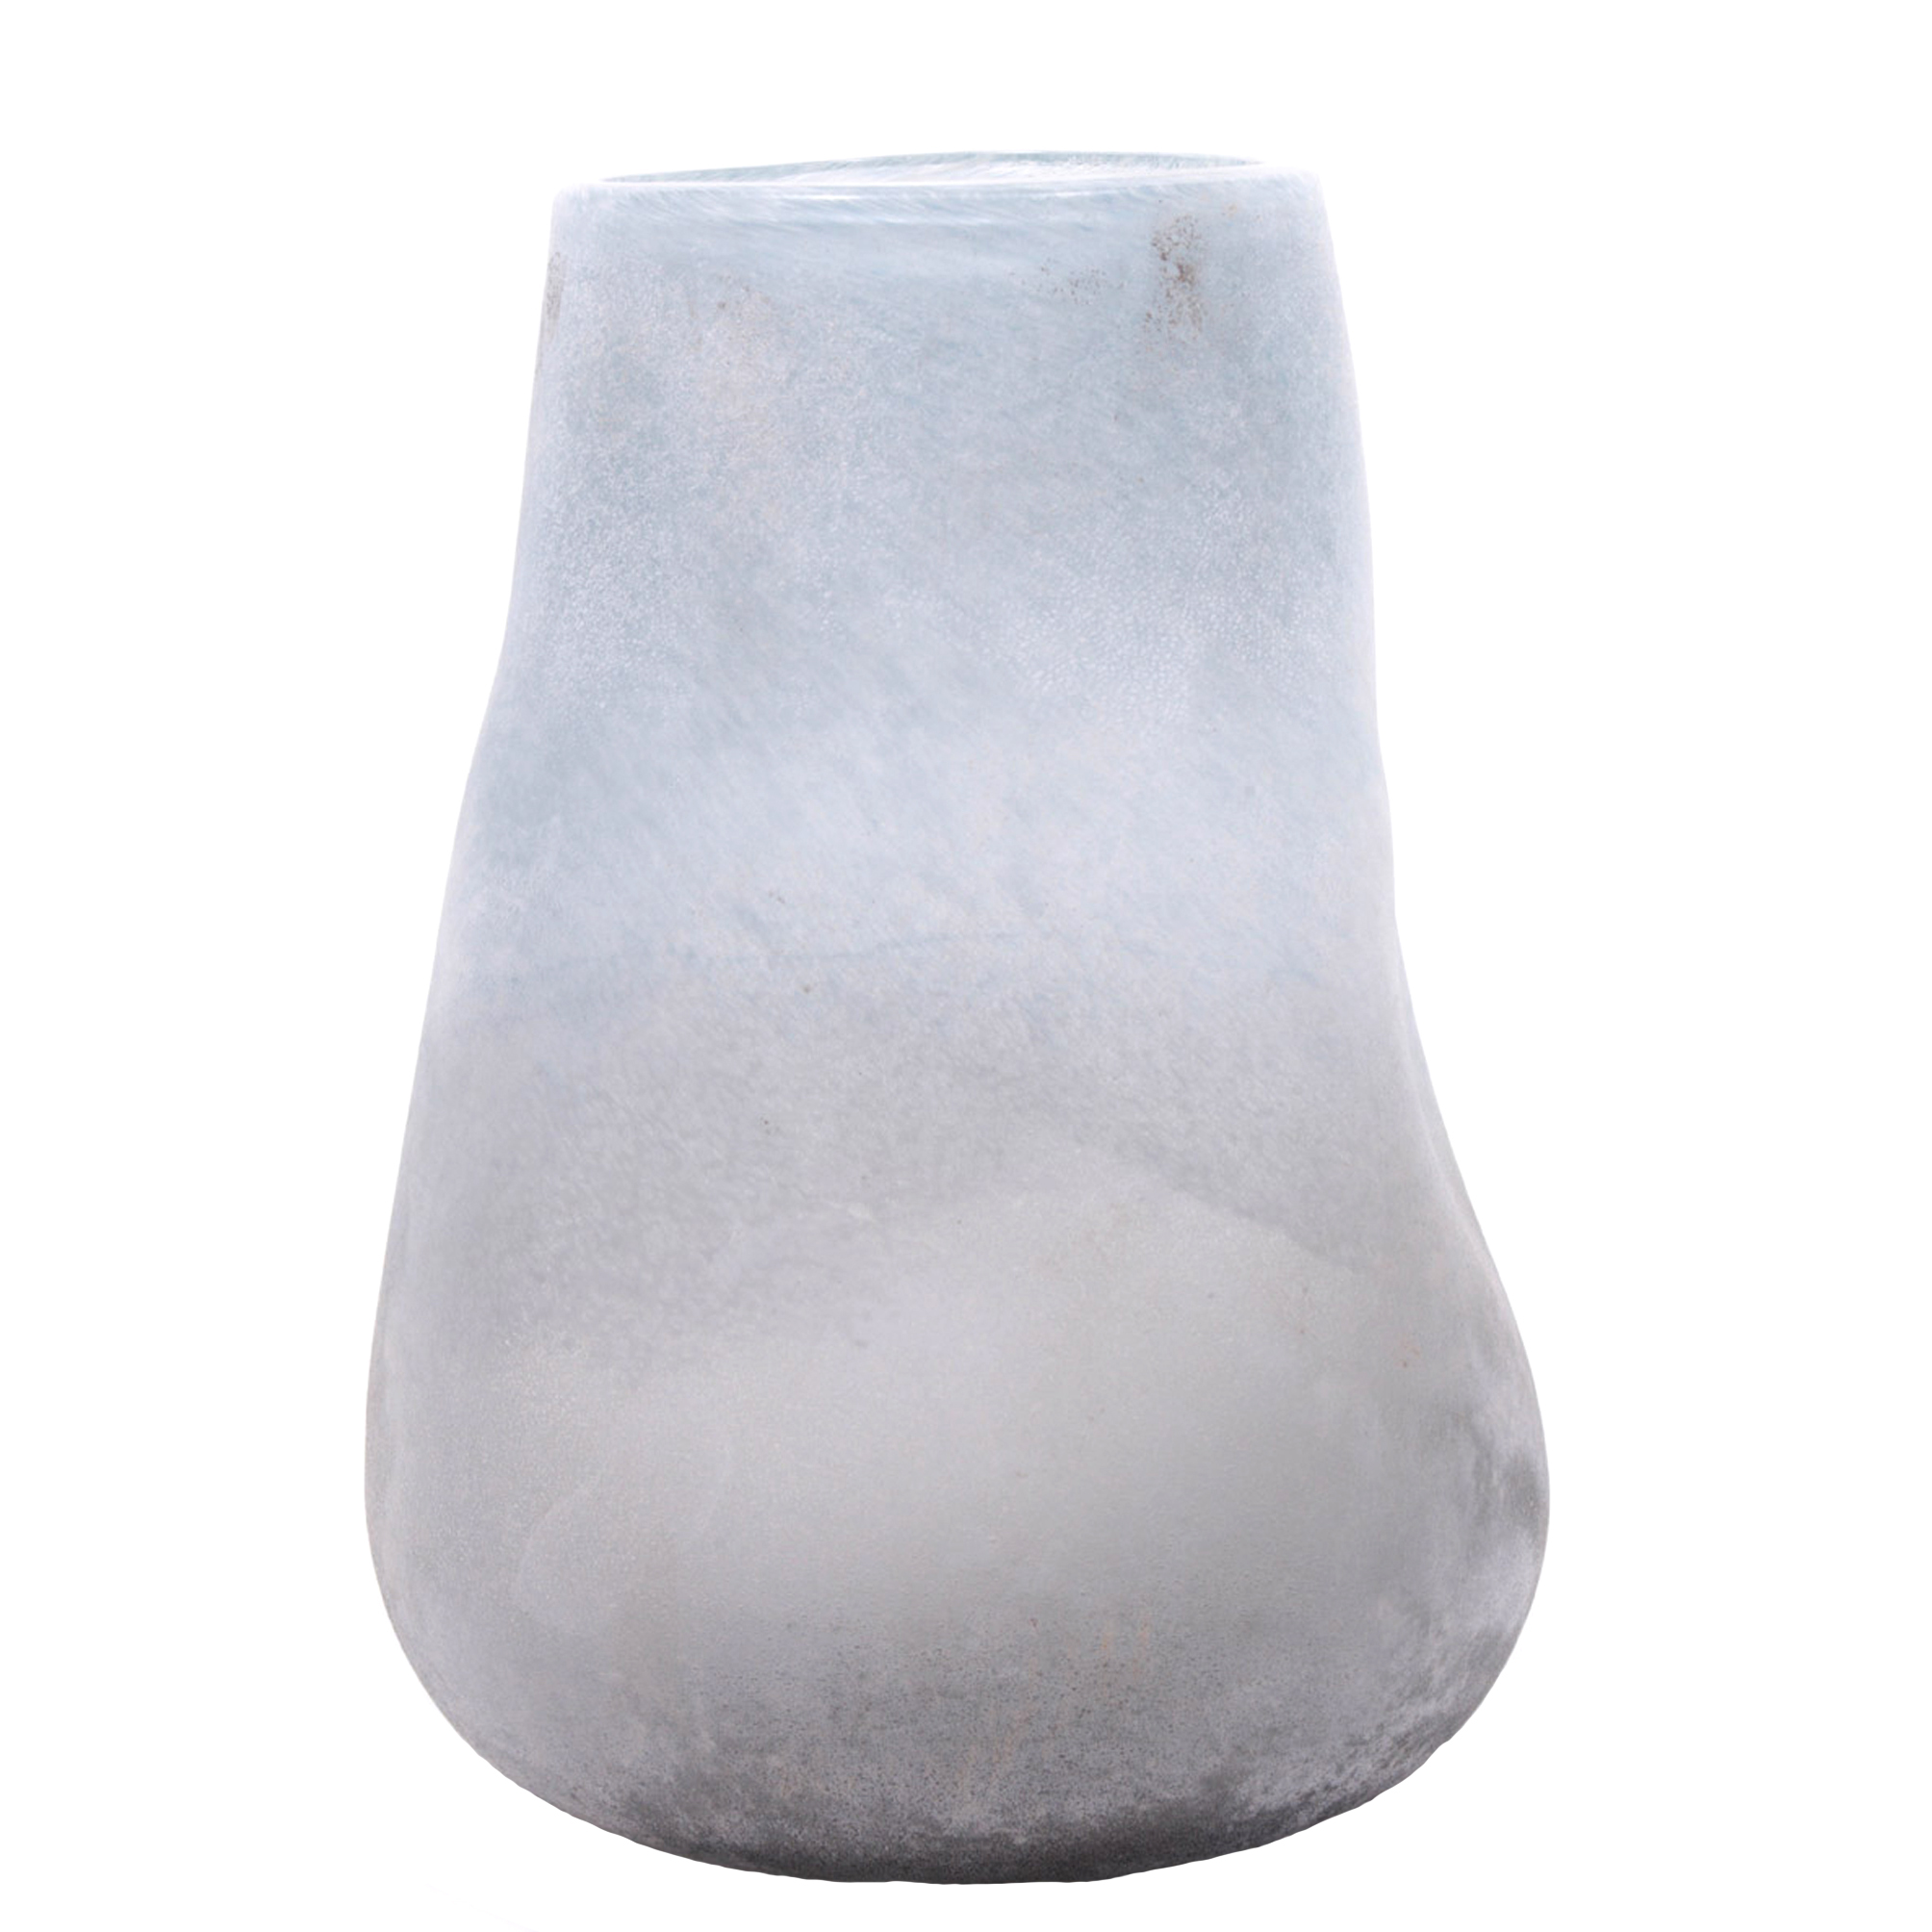 VASO FROSTED D.22XH.33,5 CM